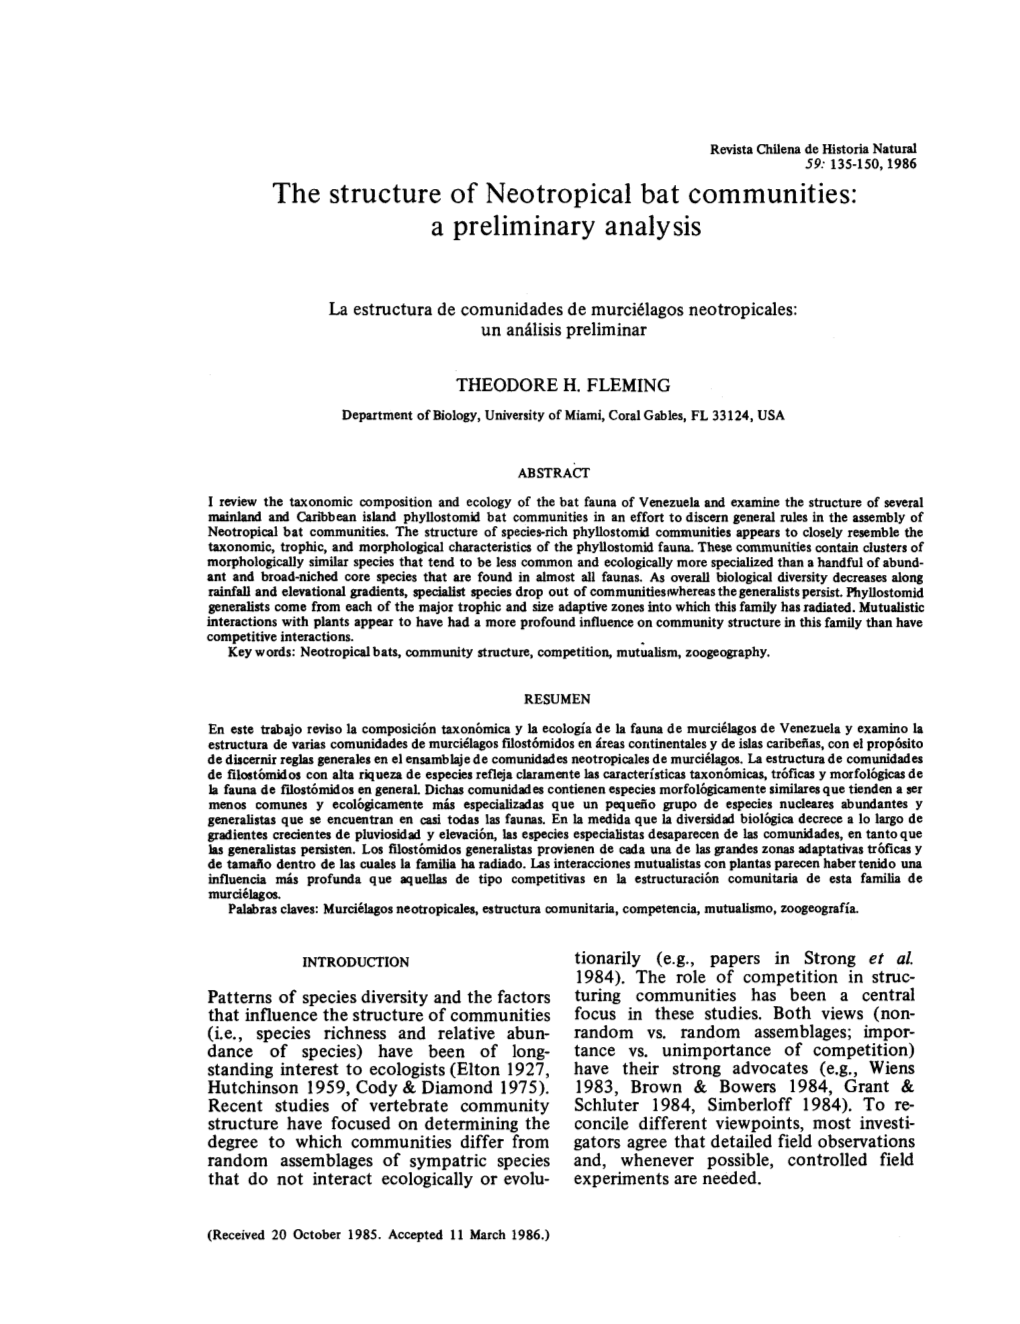 The Structure of Neotropical Bat Communities: a Preliminary Analysis